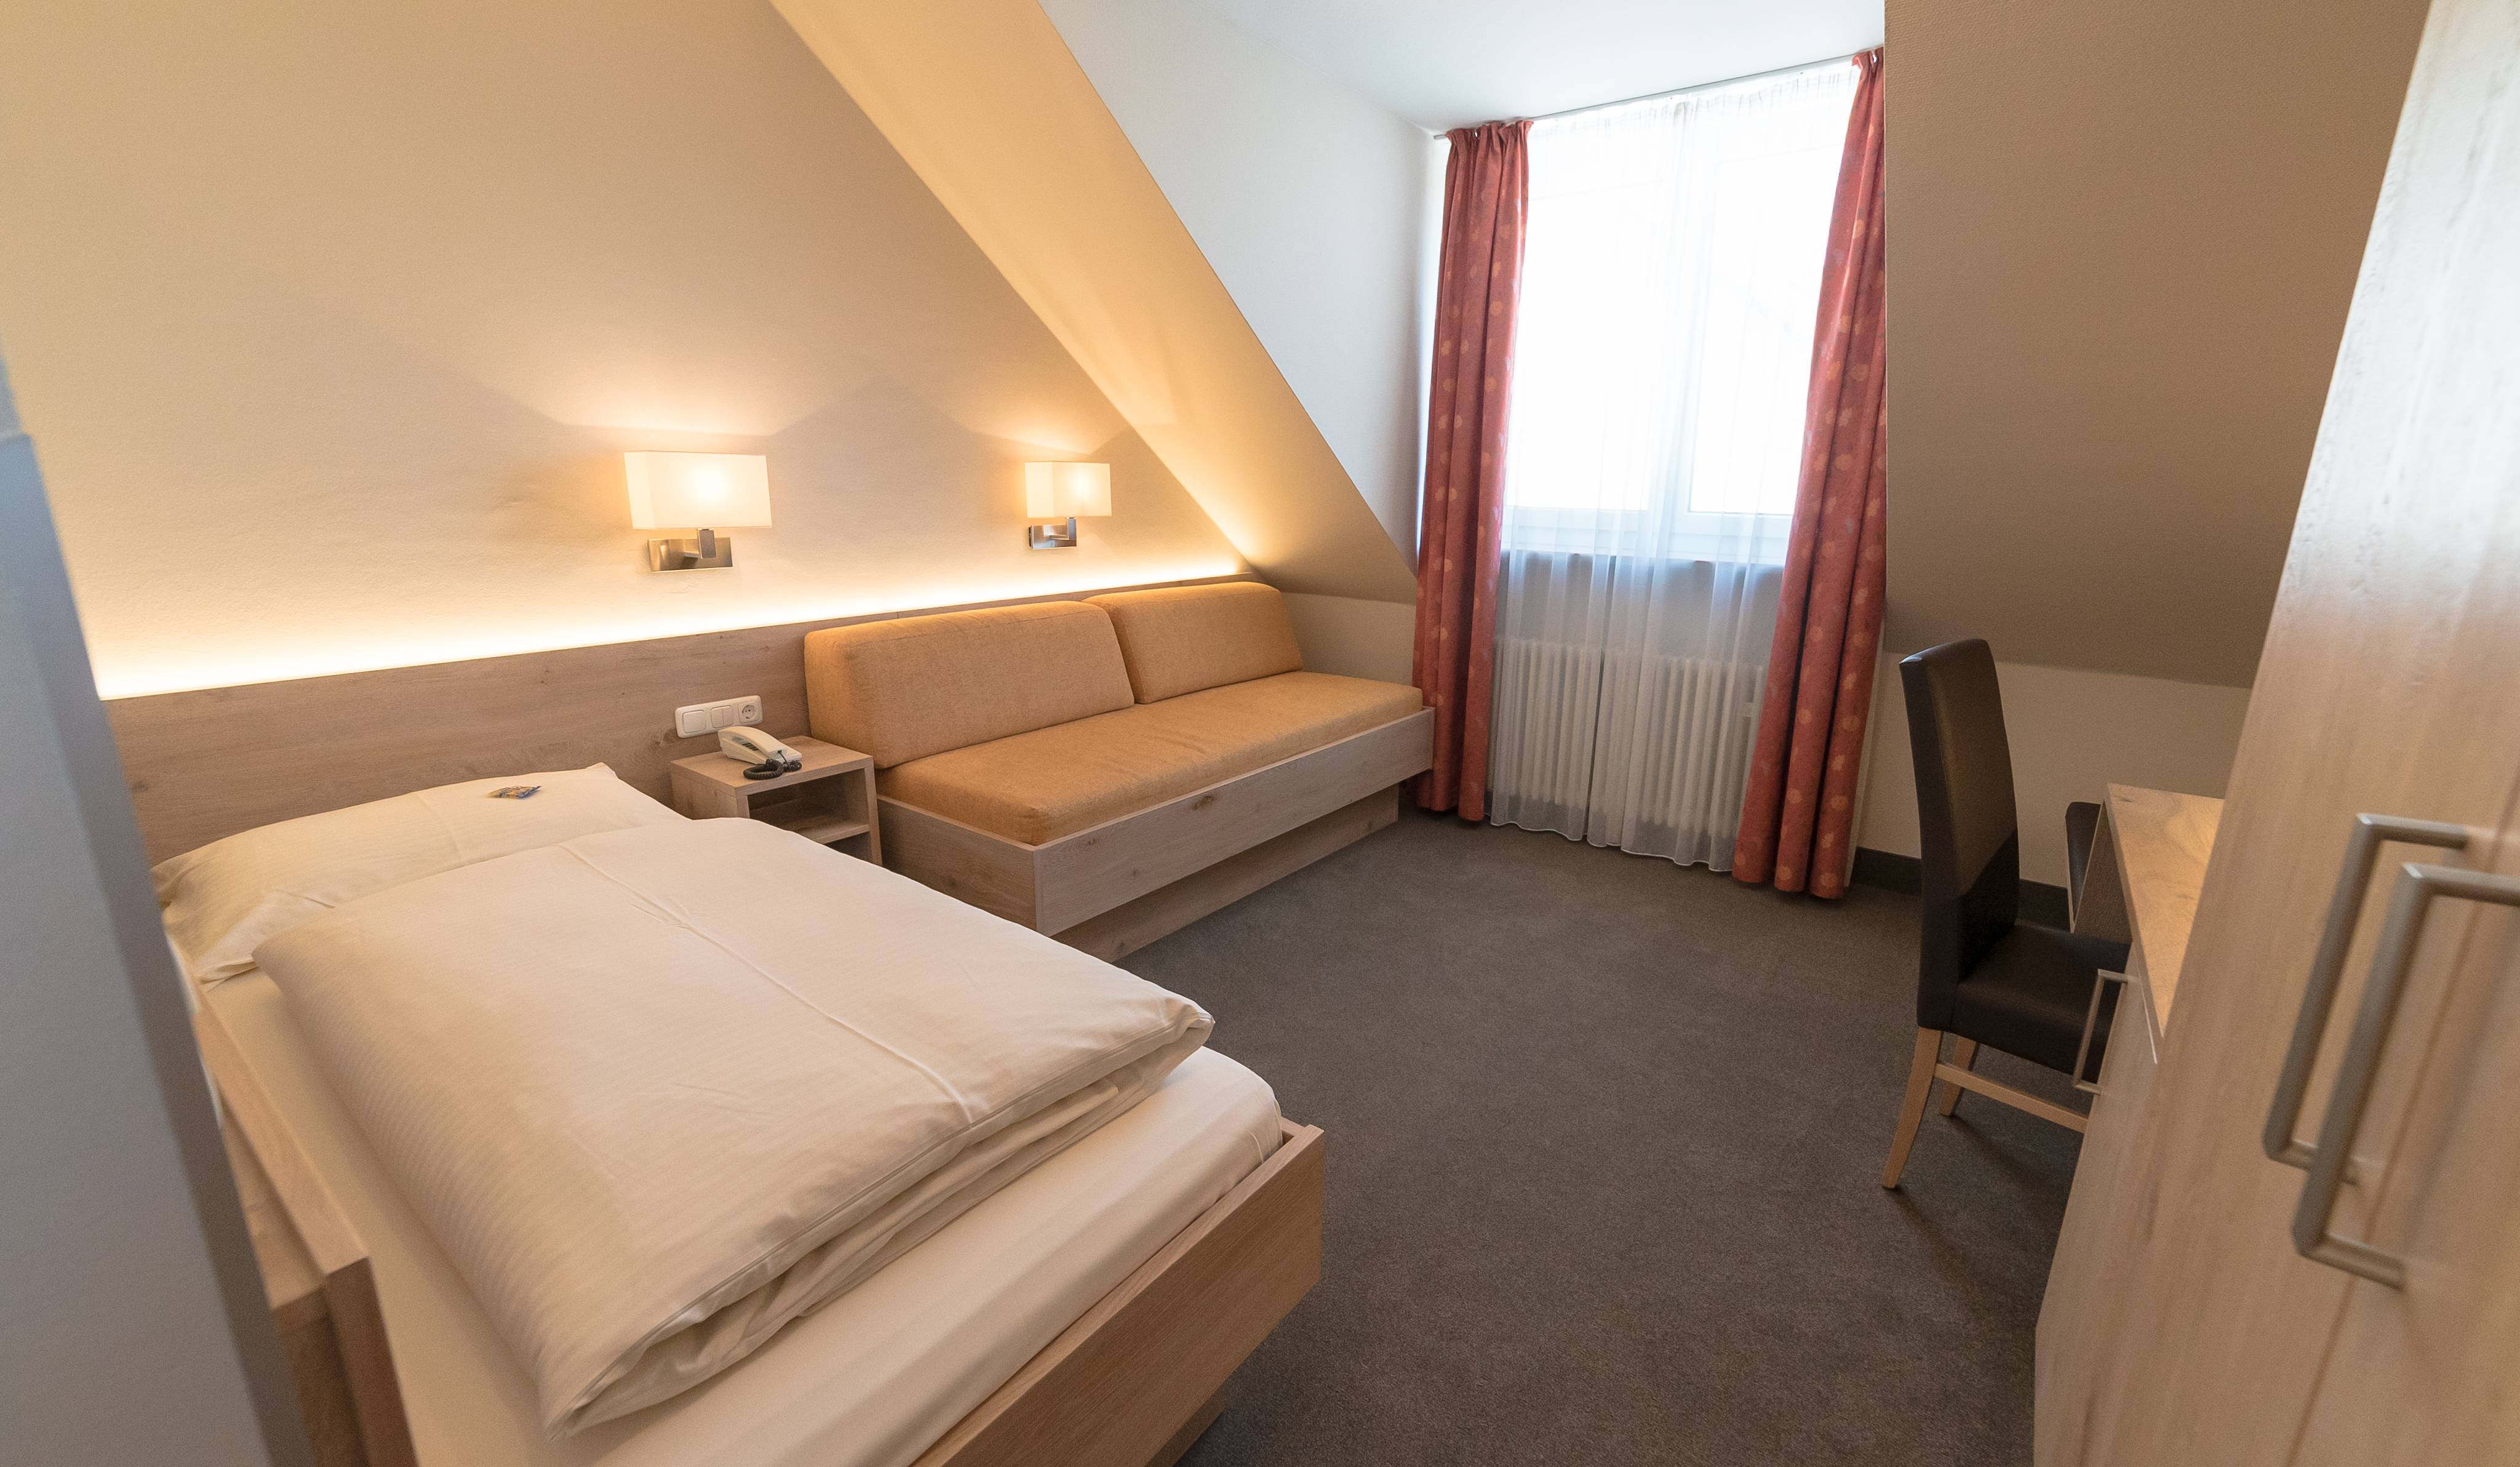 Spend the night in the Lutter Hotel & Apartments  - Hotel Lutter in München